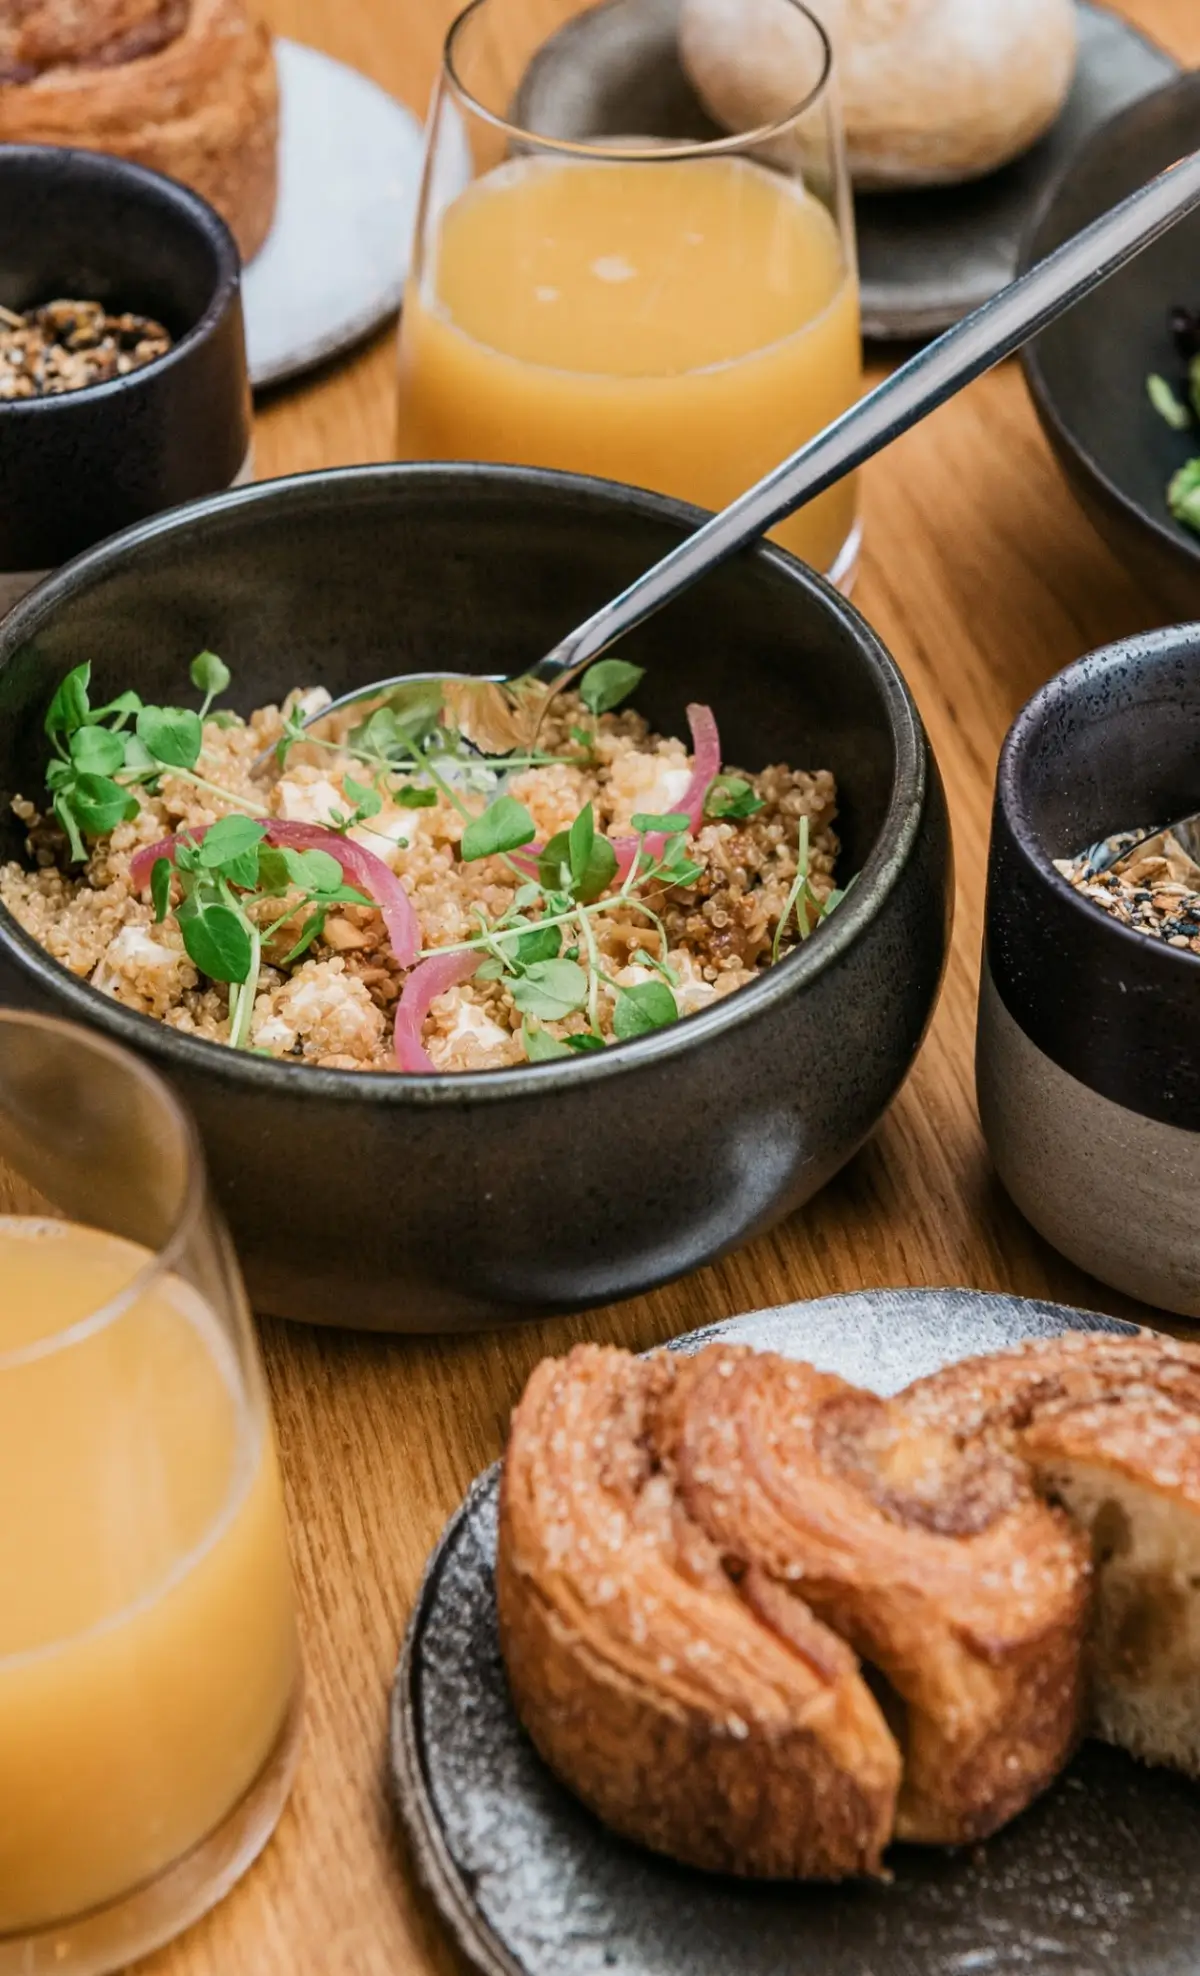 A breakfast spread at ANONA featuring a bowl of quinoa salad with microgreens, pastries, and glasses of orange juice. Highlighting the fresh and diverse menu at an affordable Michelin star restaurant in Paris.